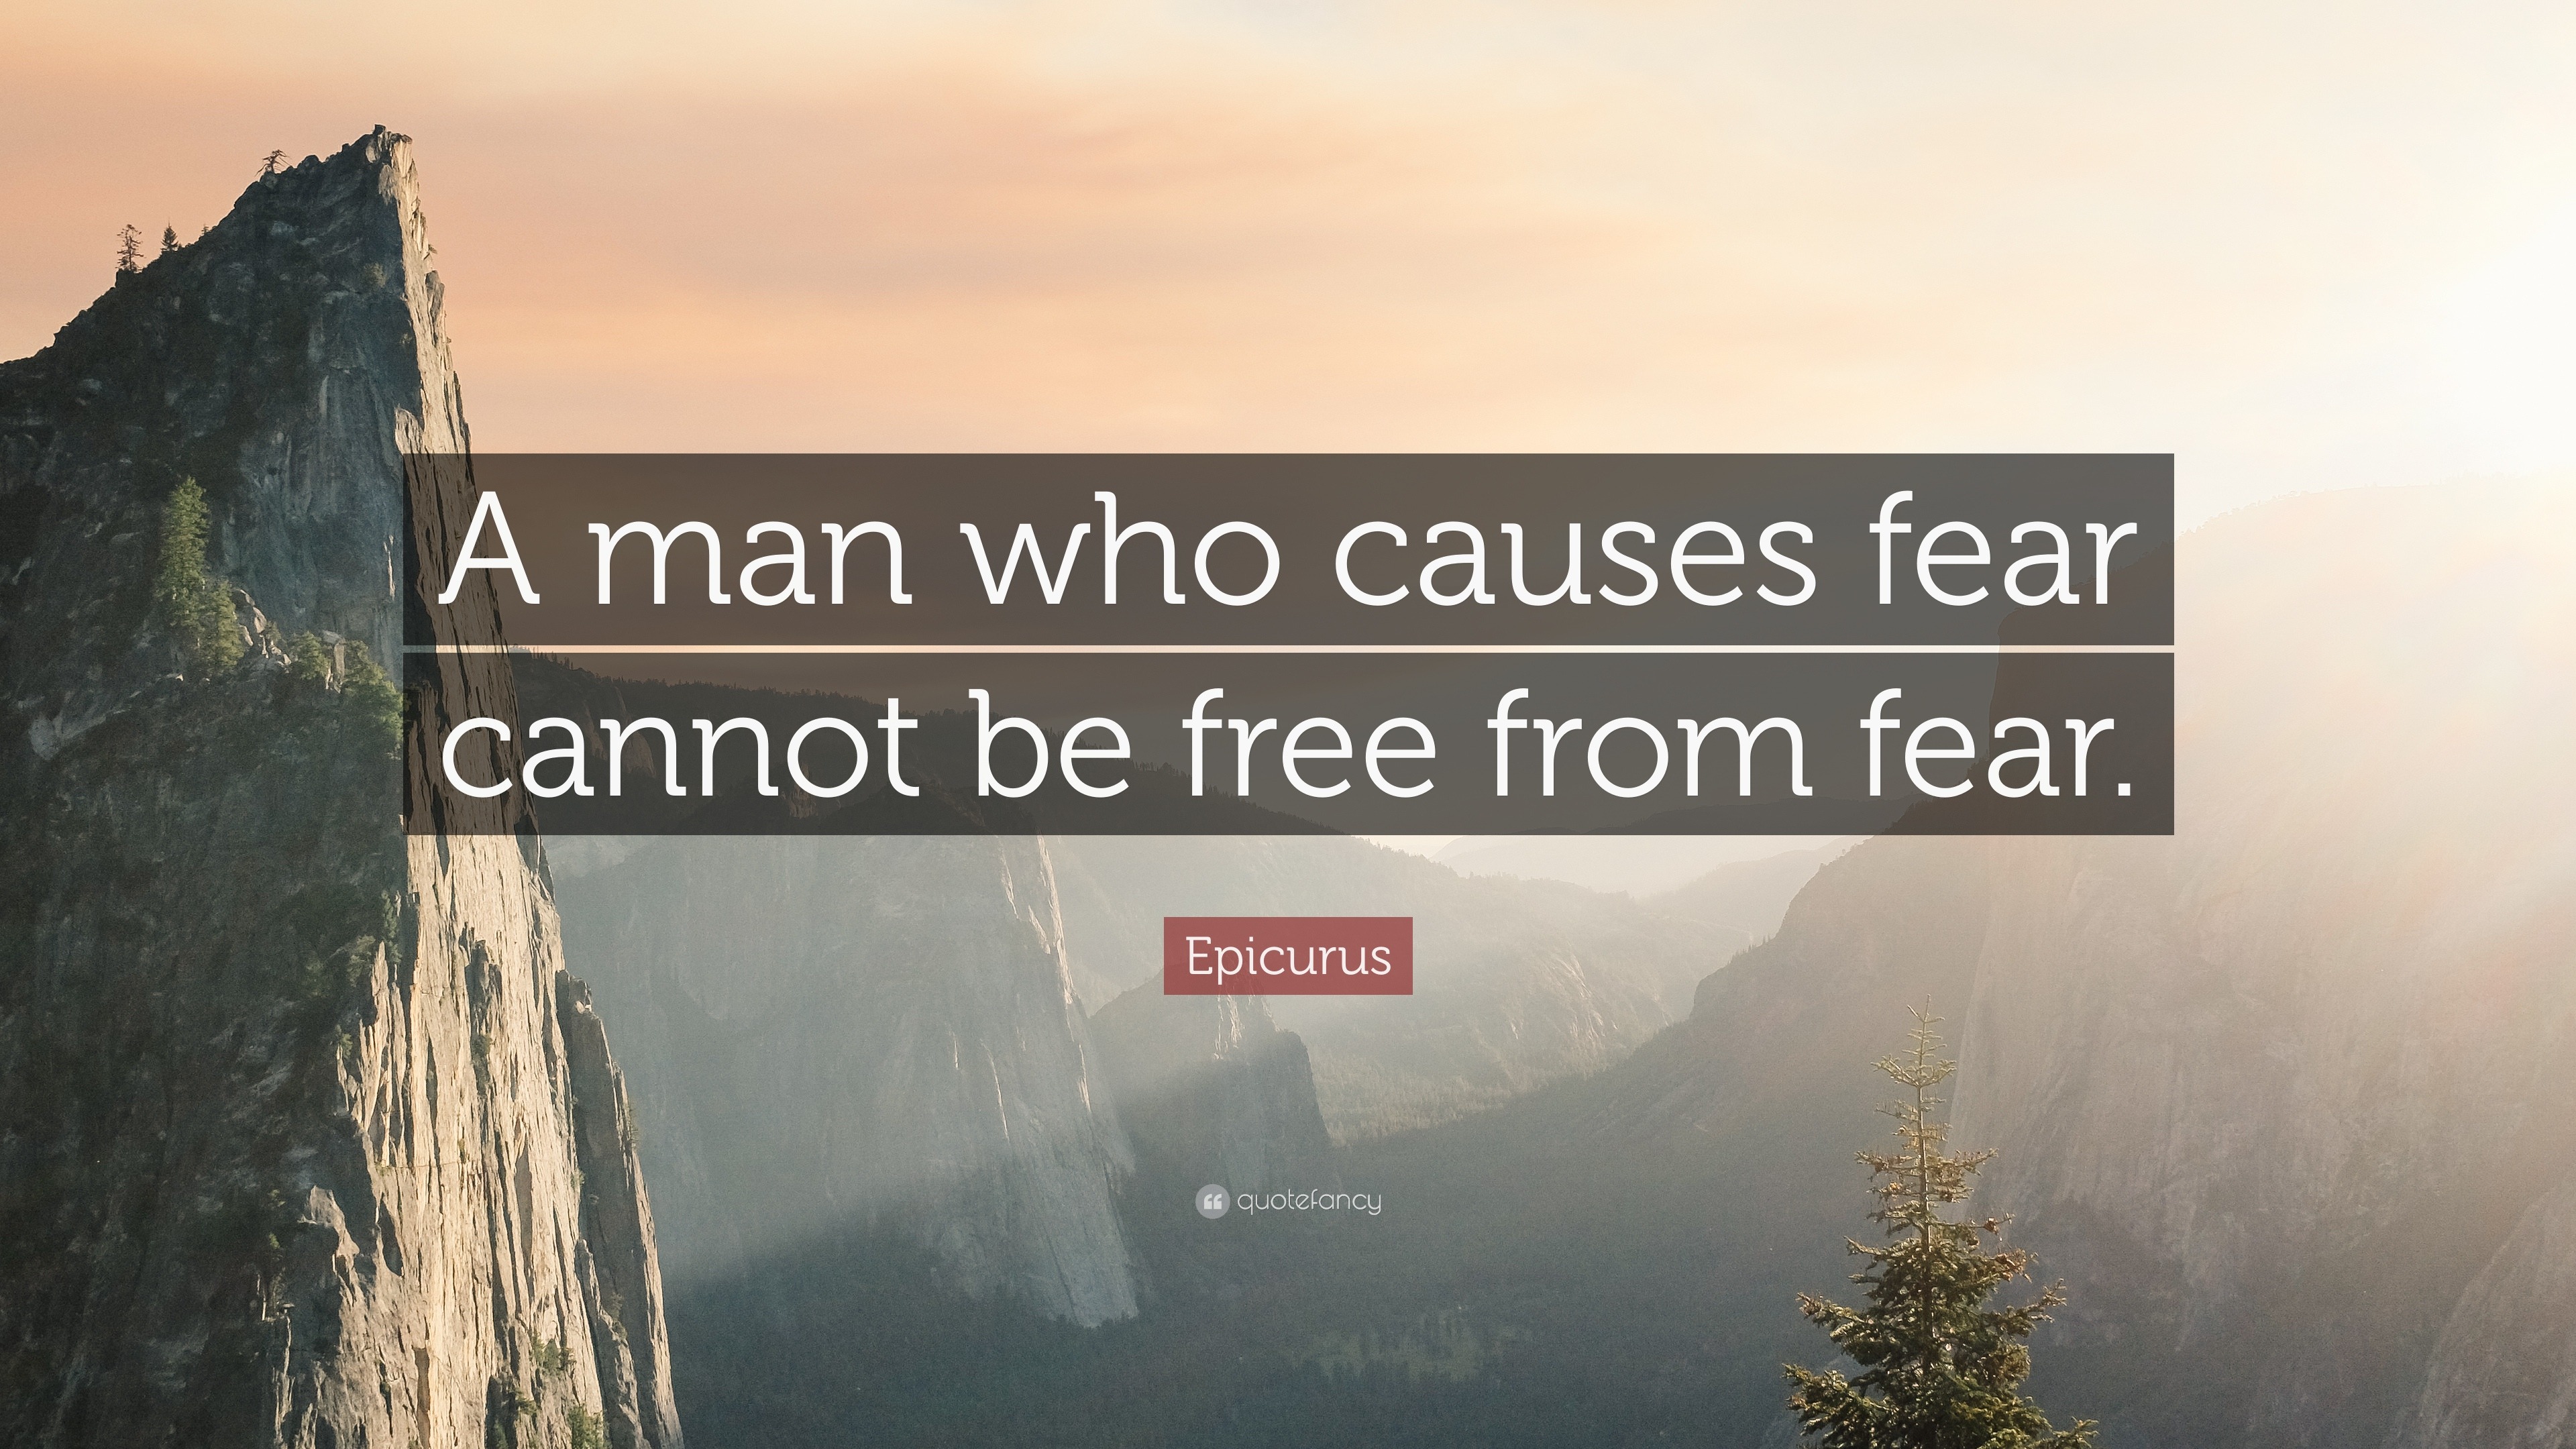 freedom from fear quotes